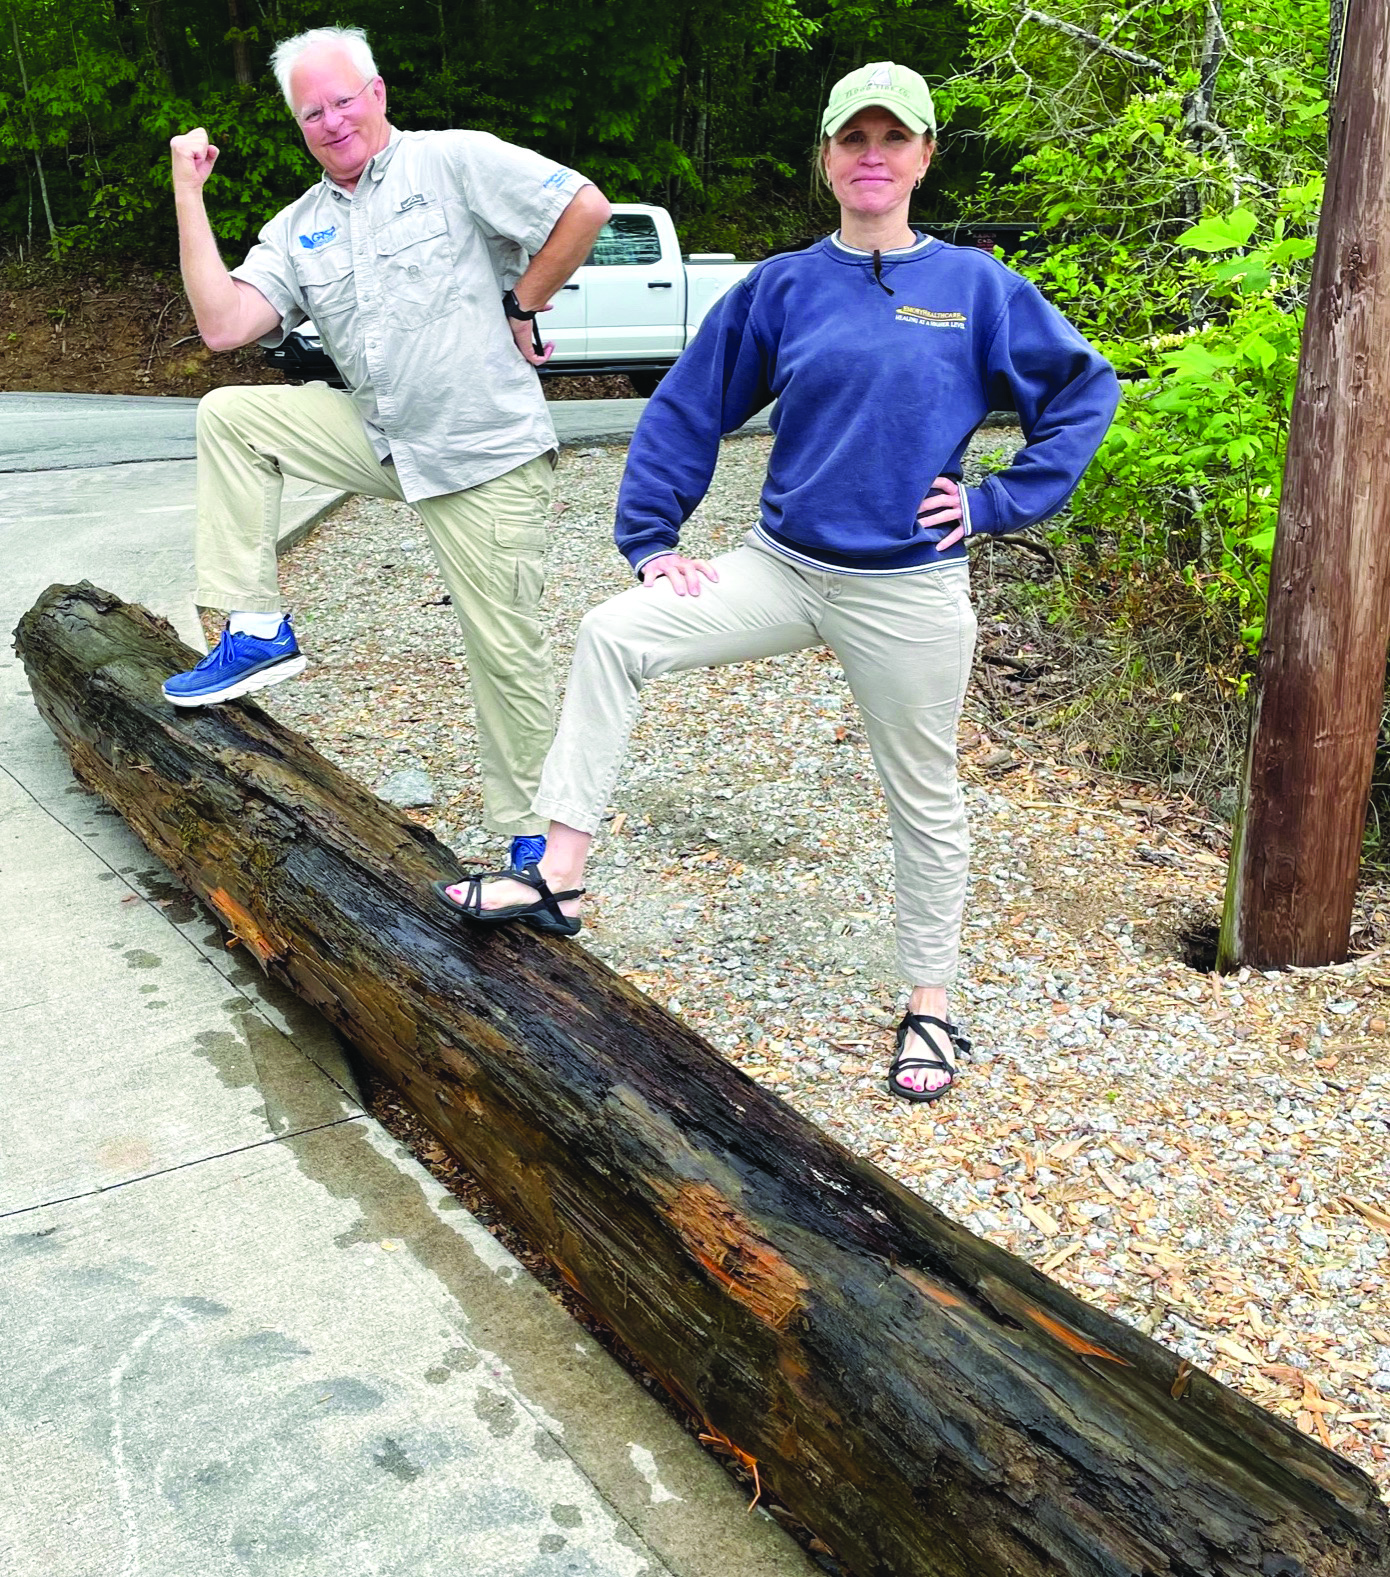 Submitted photo.  Jef Fincher and Vicki Veal, volunteers with the LBCA “Clean Up the Lake Day” event on Friday, May 12, show off a huge log they hauled-in during the event.